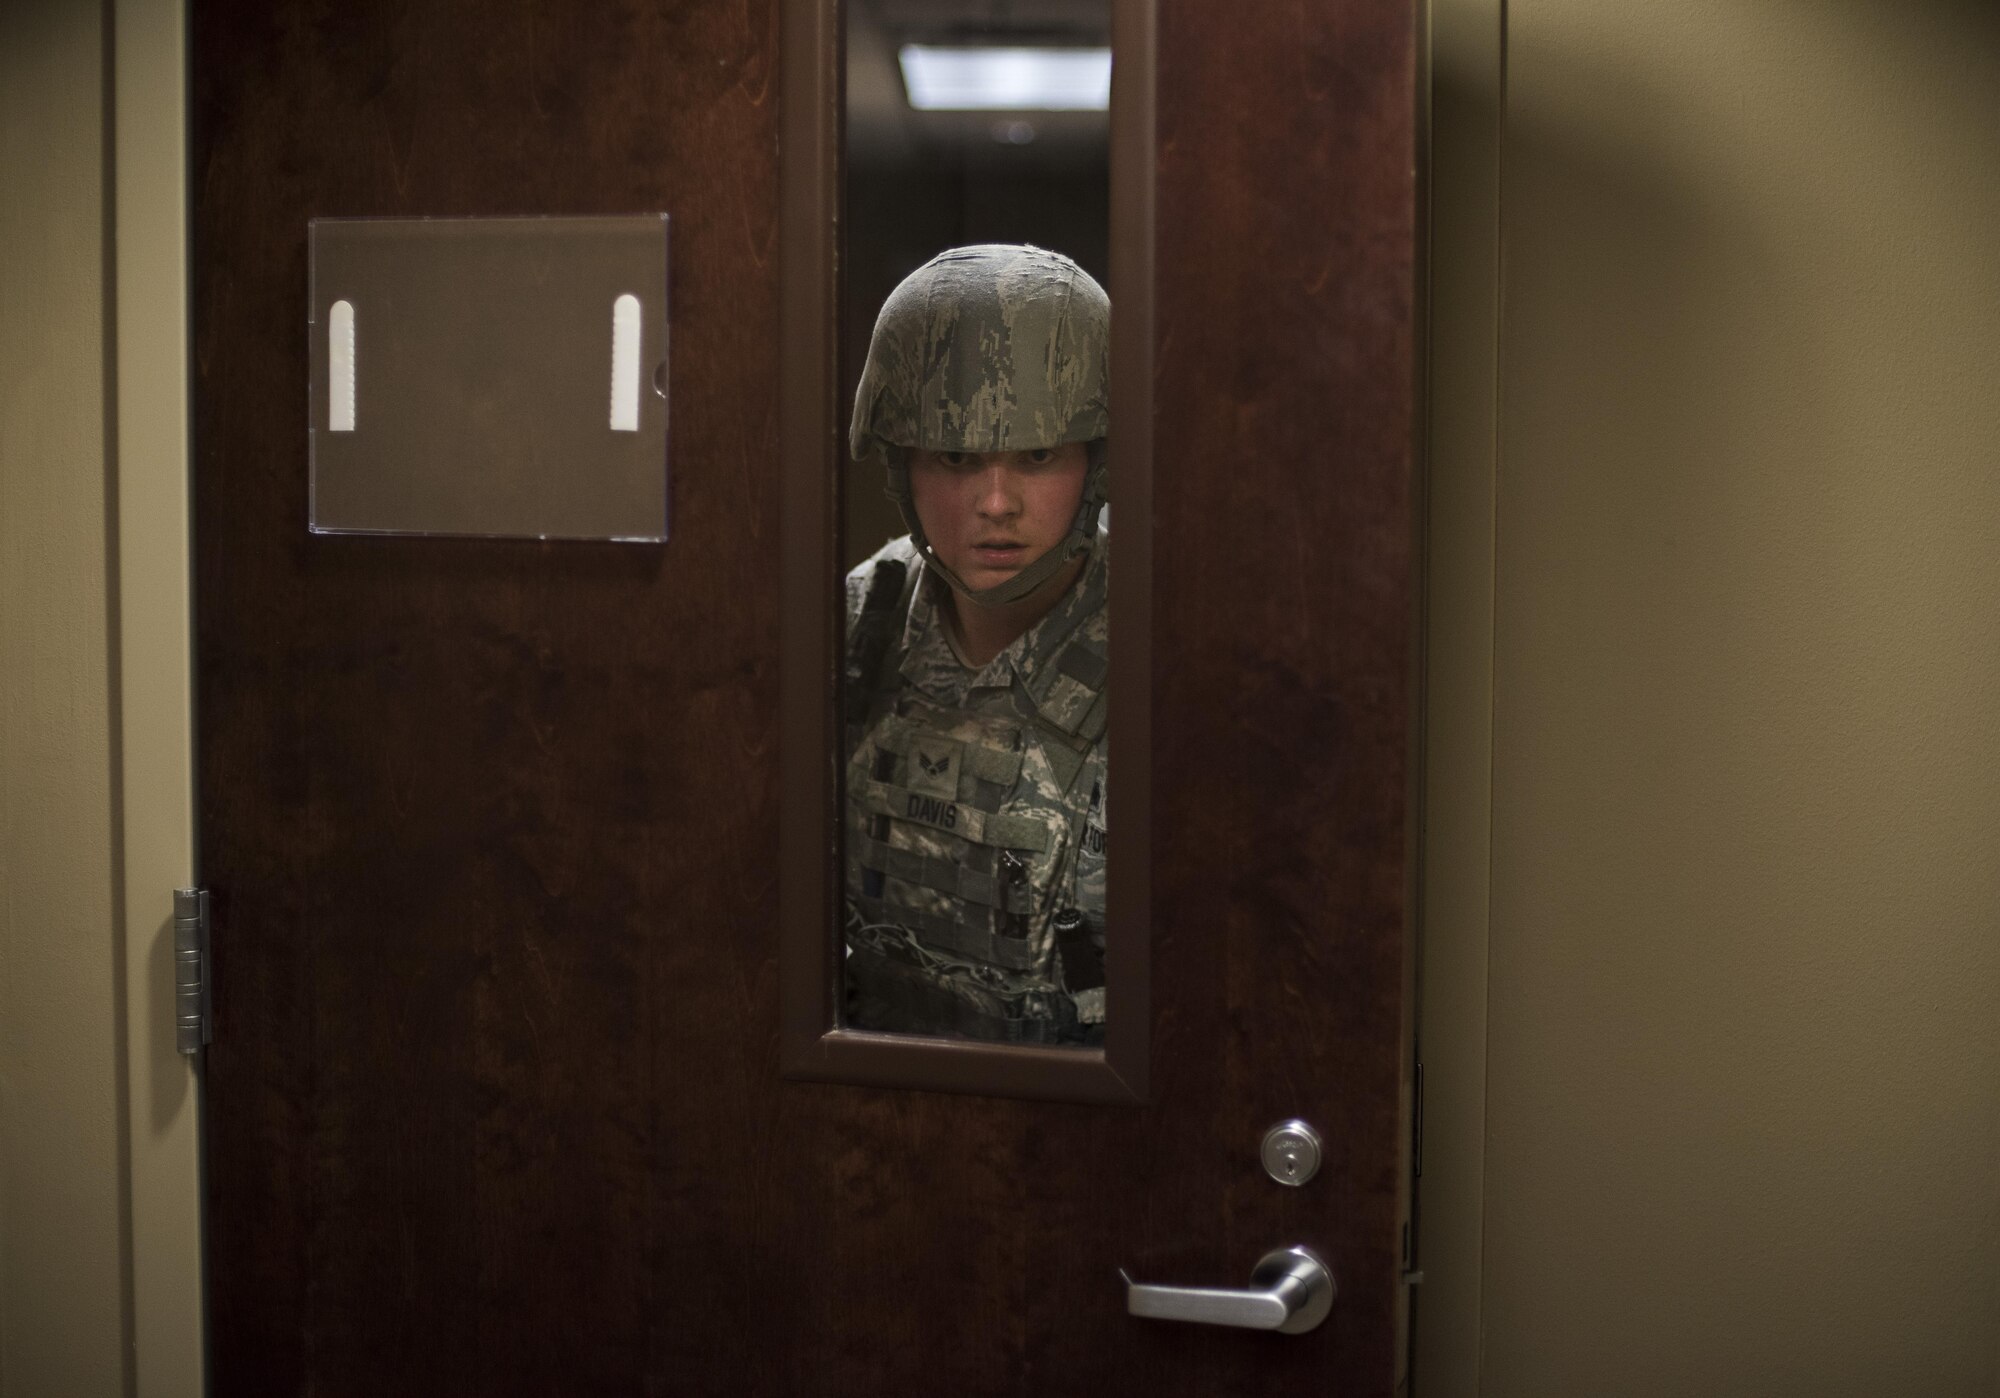 Senior Airman Alexander Davis, 2nd Security Forces Squadron patrolman, searches rooms for victims and potential threats during an active shooter exercise at Barksdale Air Force Base, La., Nov. 29, 2016.  Exercises allow the commander to see exactly what areas need more focus and training, and a means to enhance readiness, boost capabilities and streamline procedures in the event of a major incident. (U.S. Air Force photo/Senior Airman Damon Kasberg)